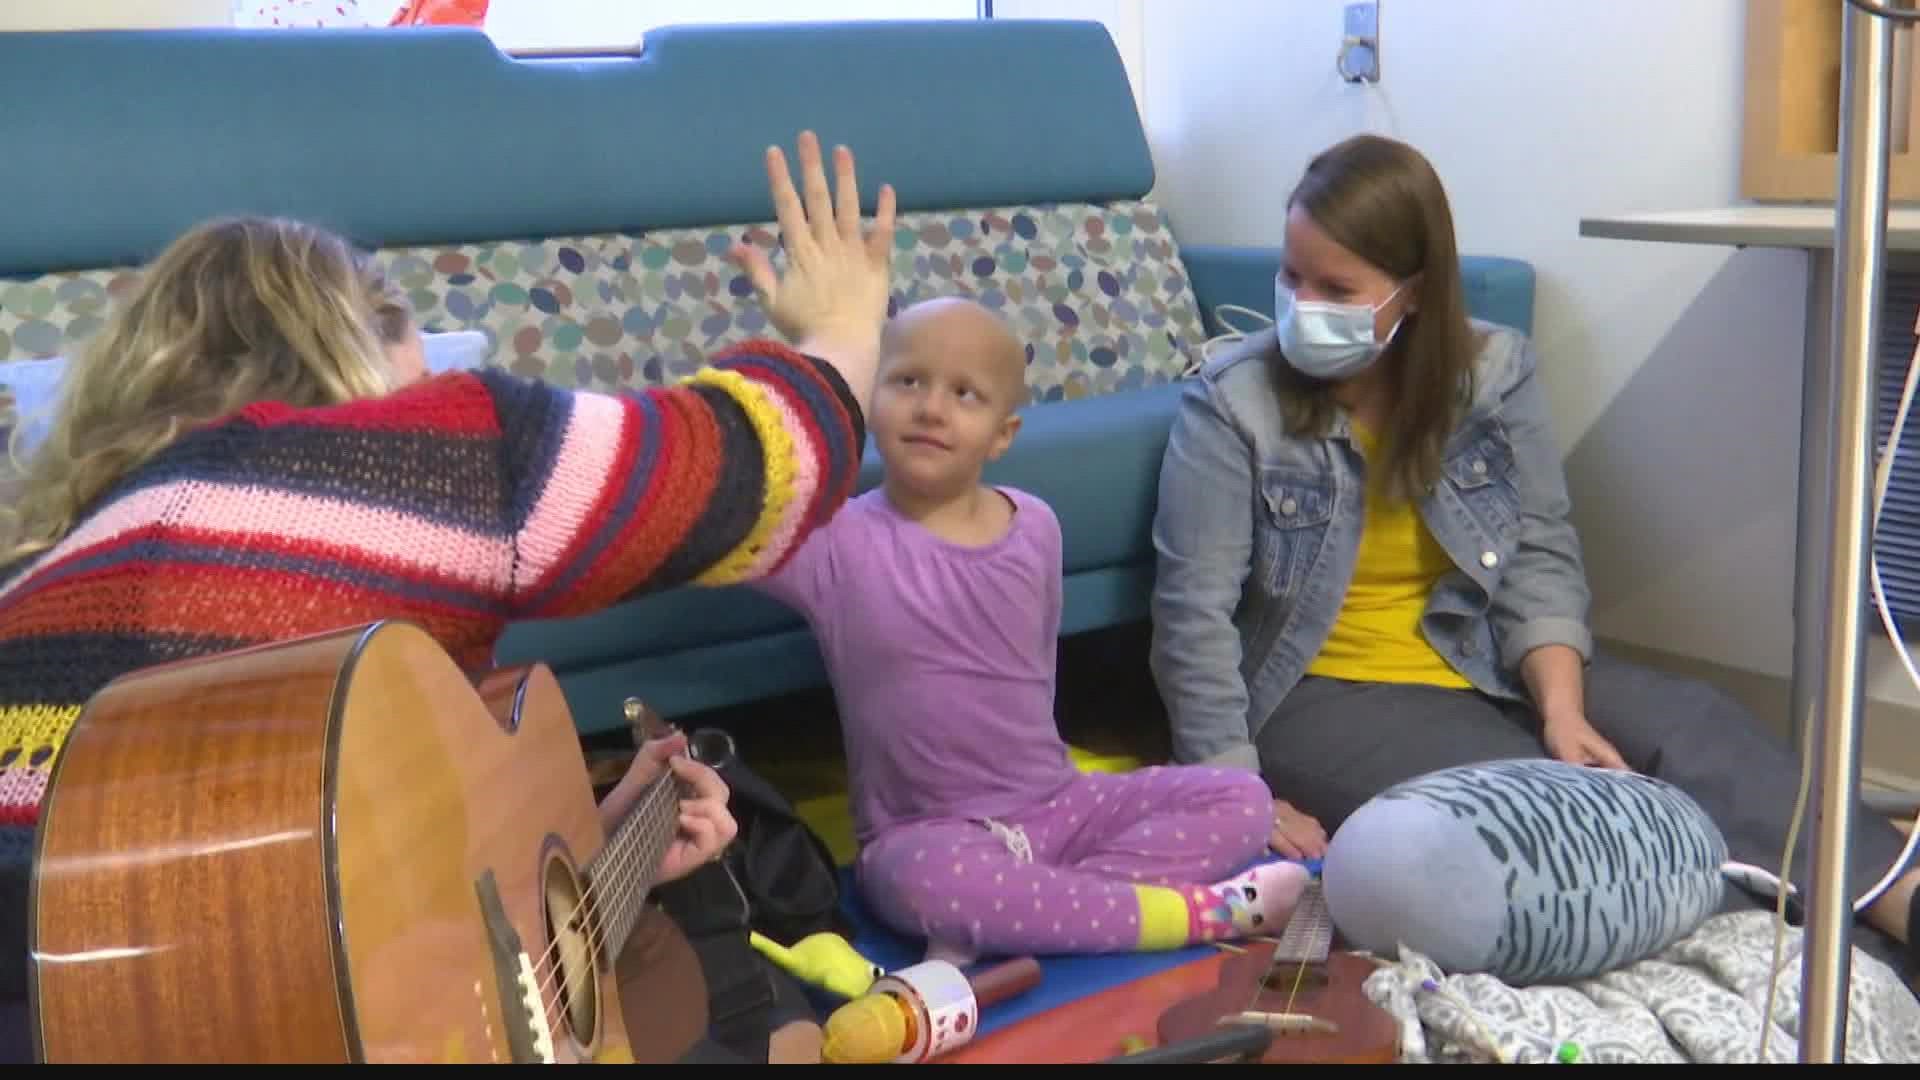 Naomi Filpus has stage 4 neuroblastoma and is undergoing treatment at Riley Hospital.